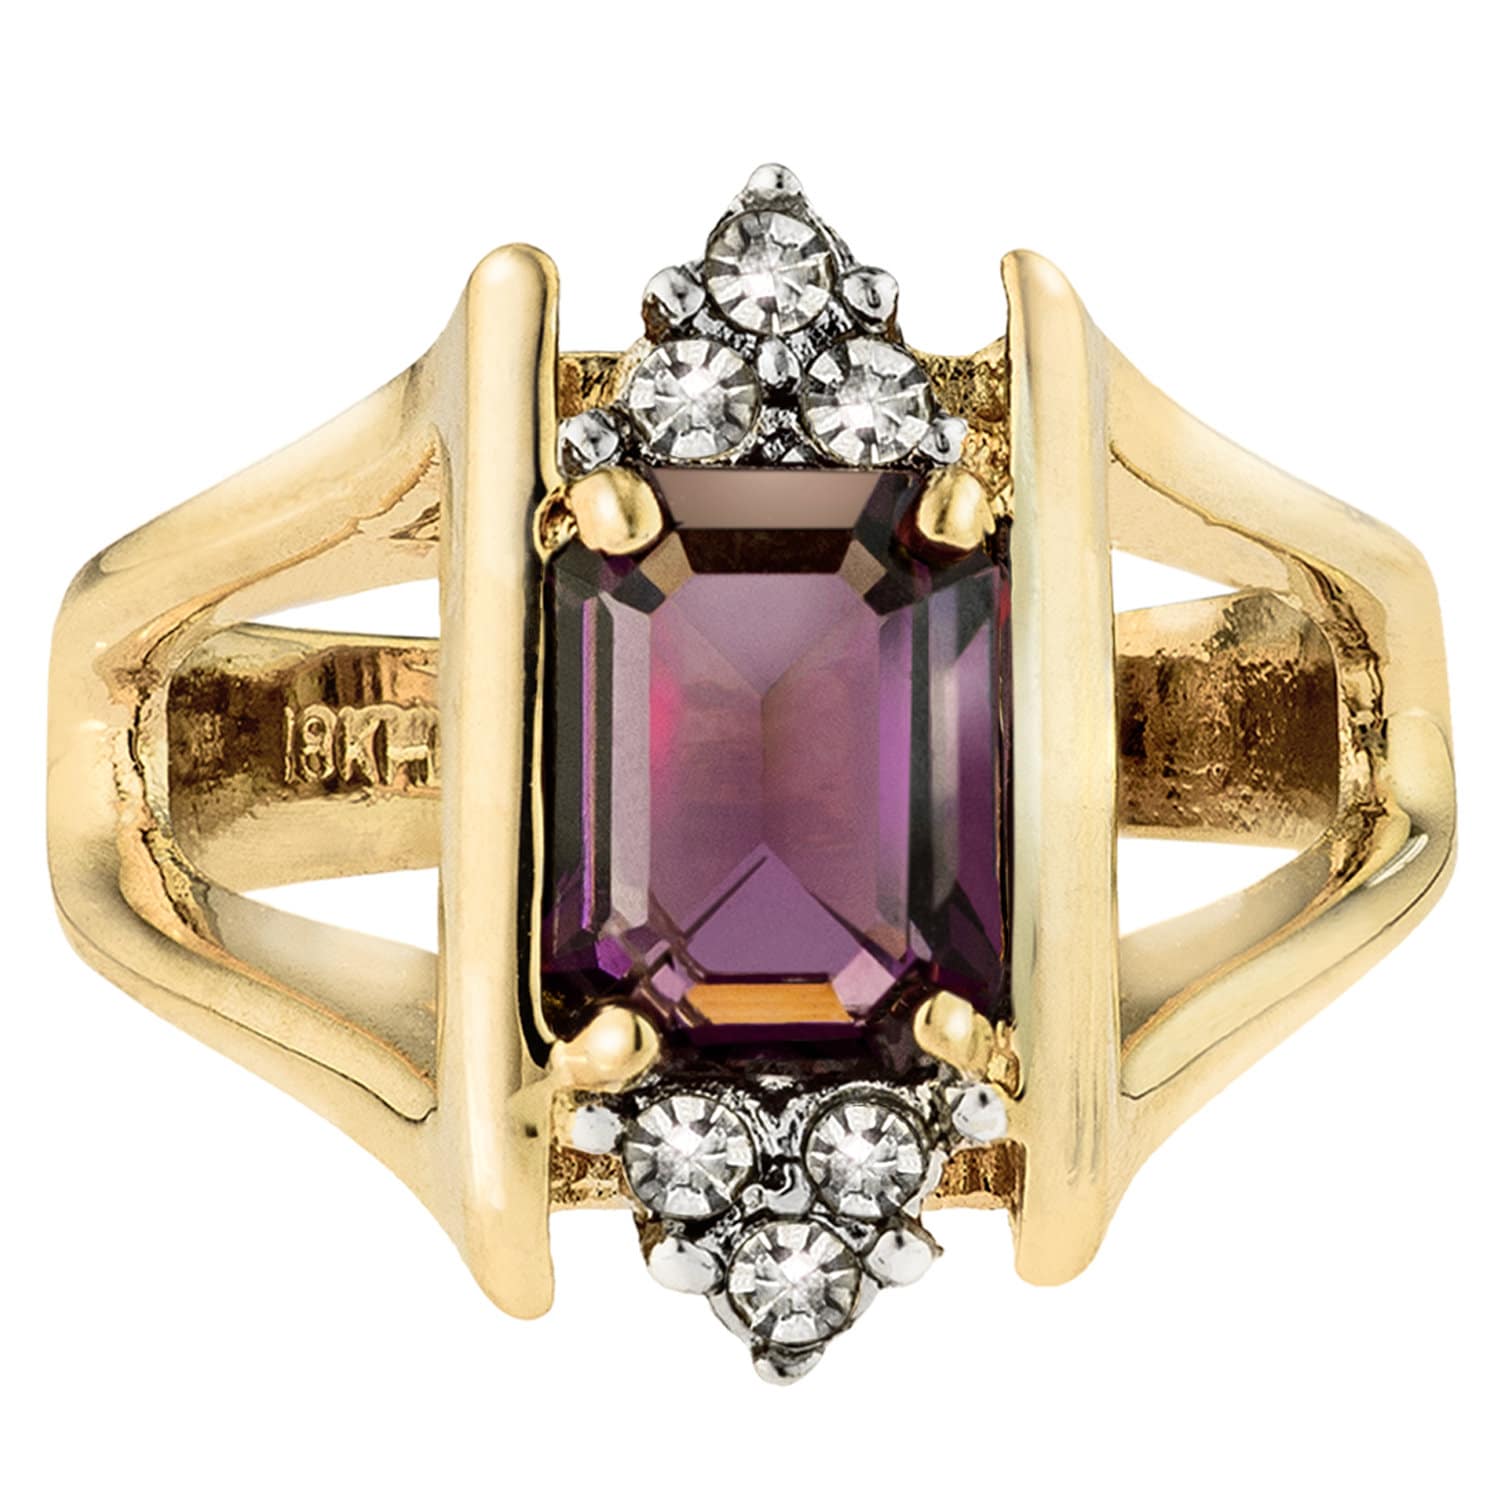 Women's Vintage Ring Amethyst Ring Antique 18k Gold Austrian Crystals February Birthstone Womans Jewelry #R1747